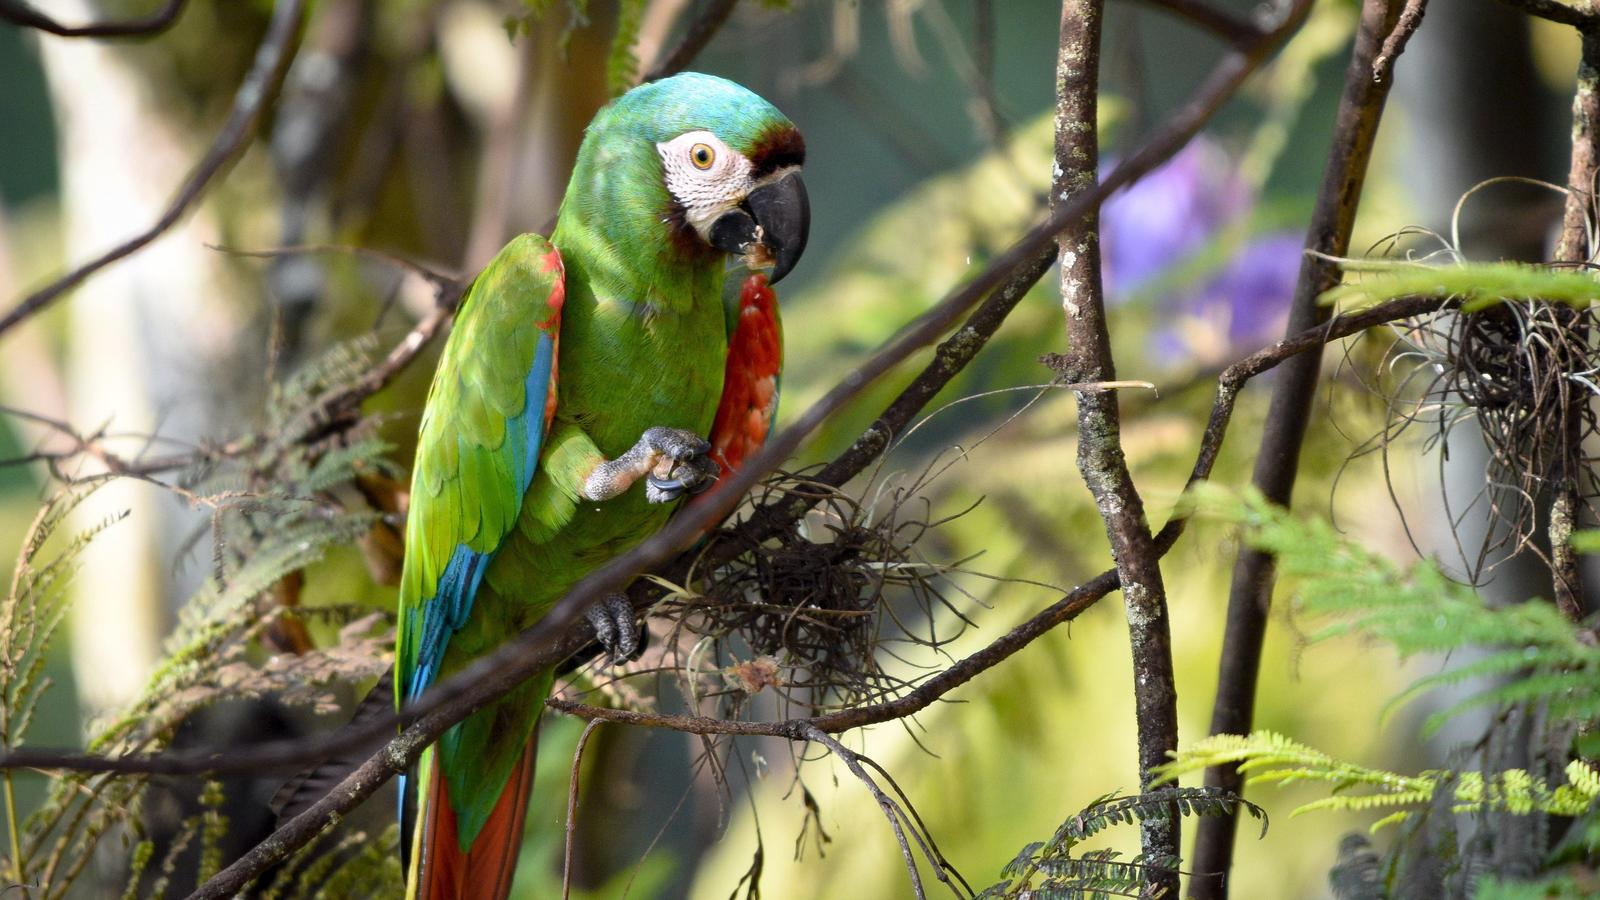 Chestnut-fronted Macaw Photo by Julio Delgado